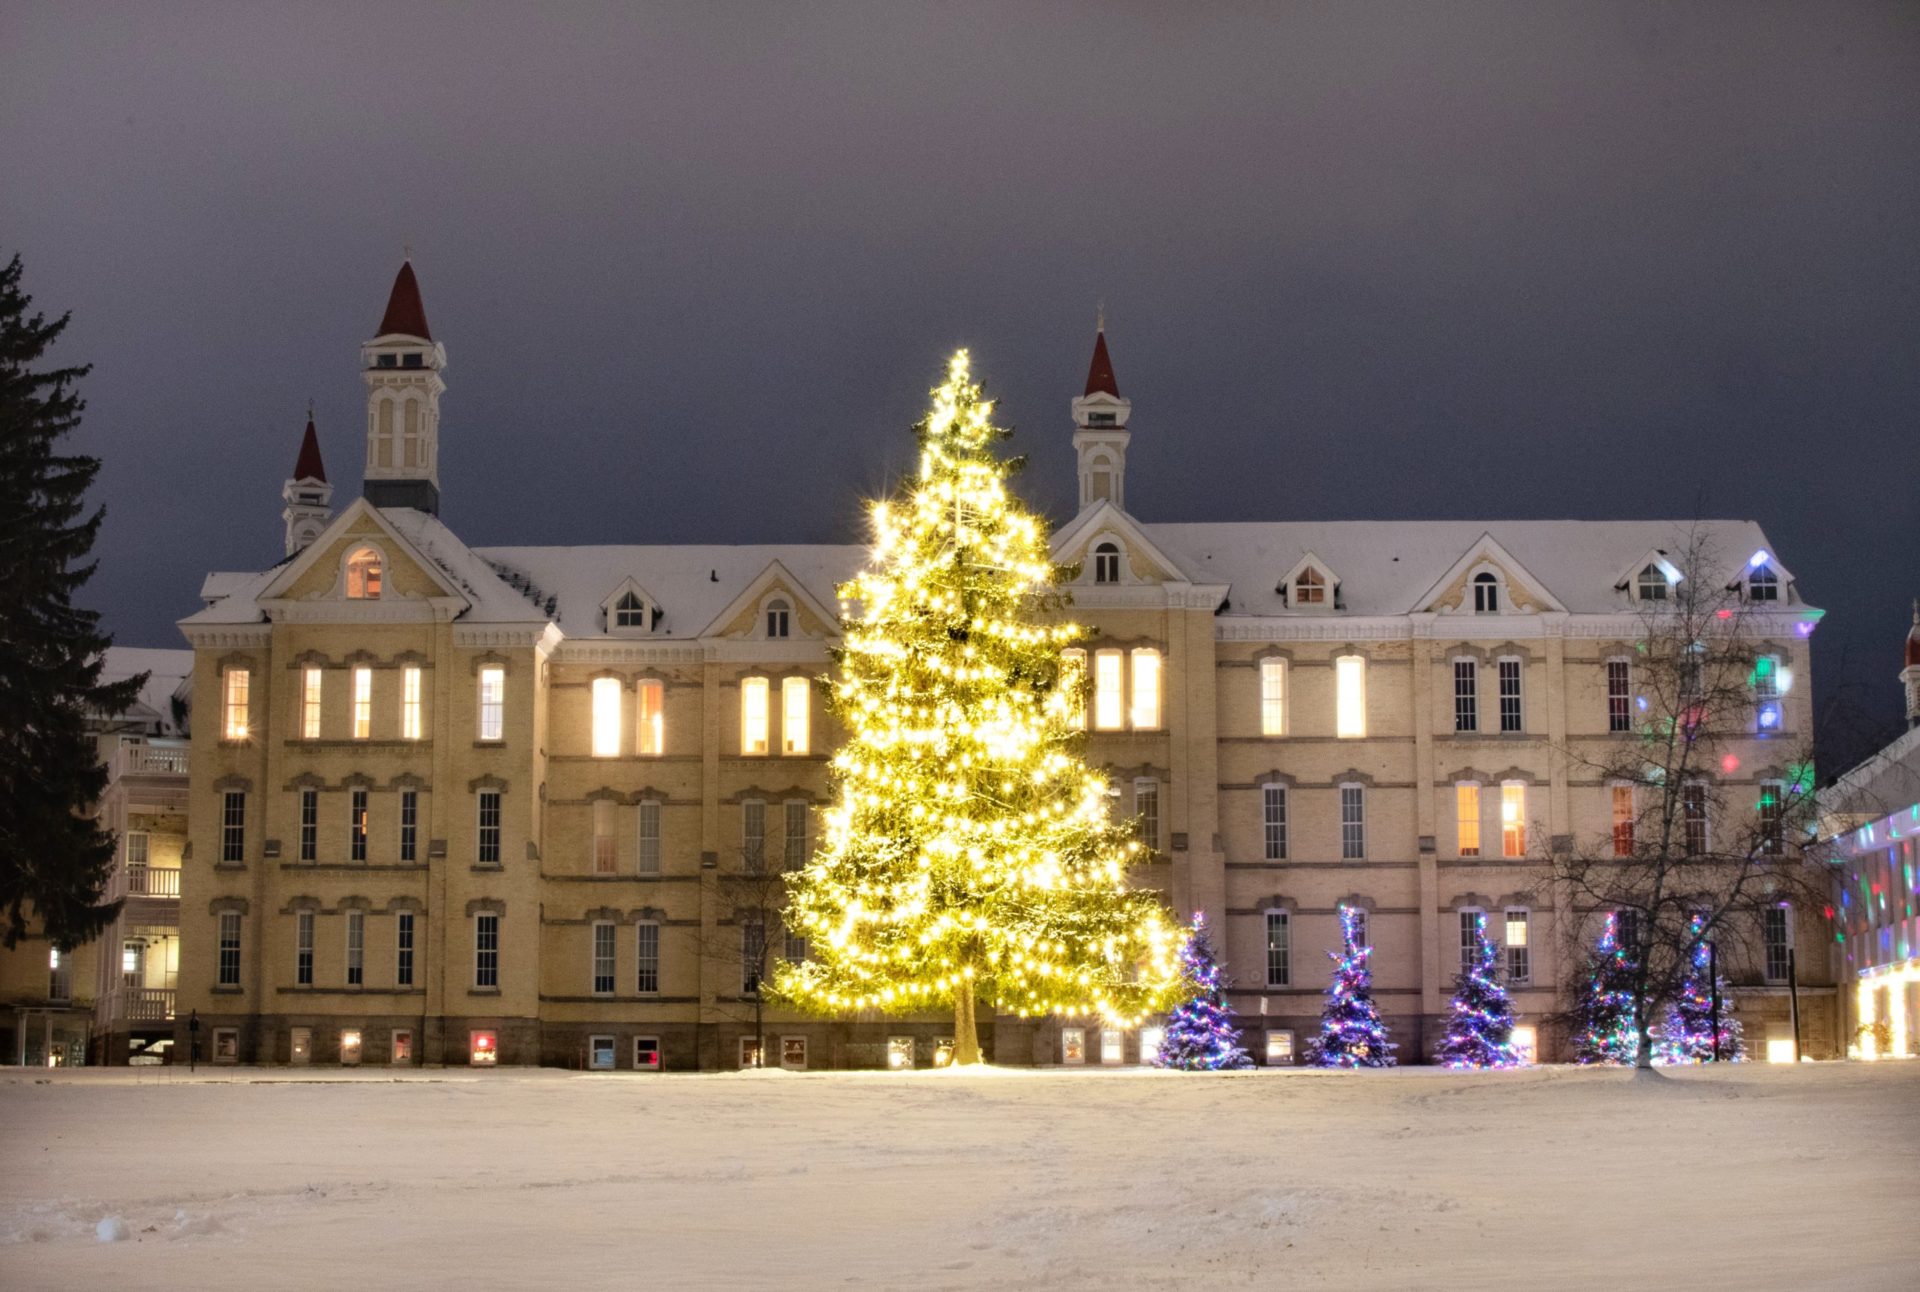 A large Christmas tree with white lights and several smaller trees with colored lights are seen in front of a three story white hospital in the snow.